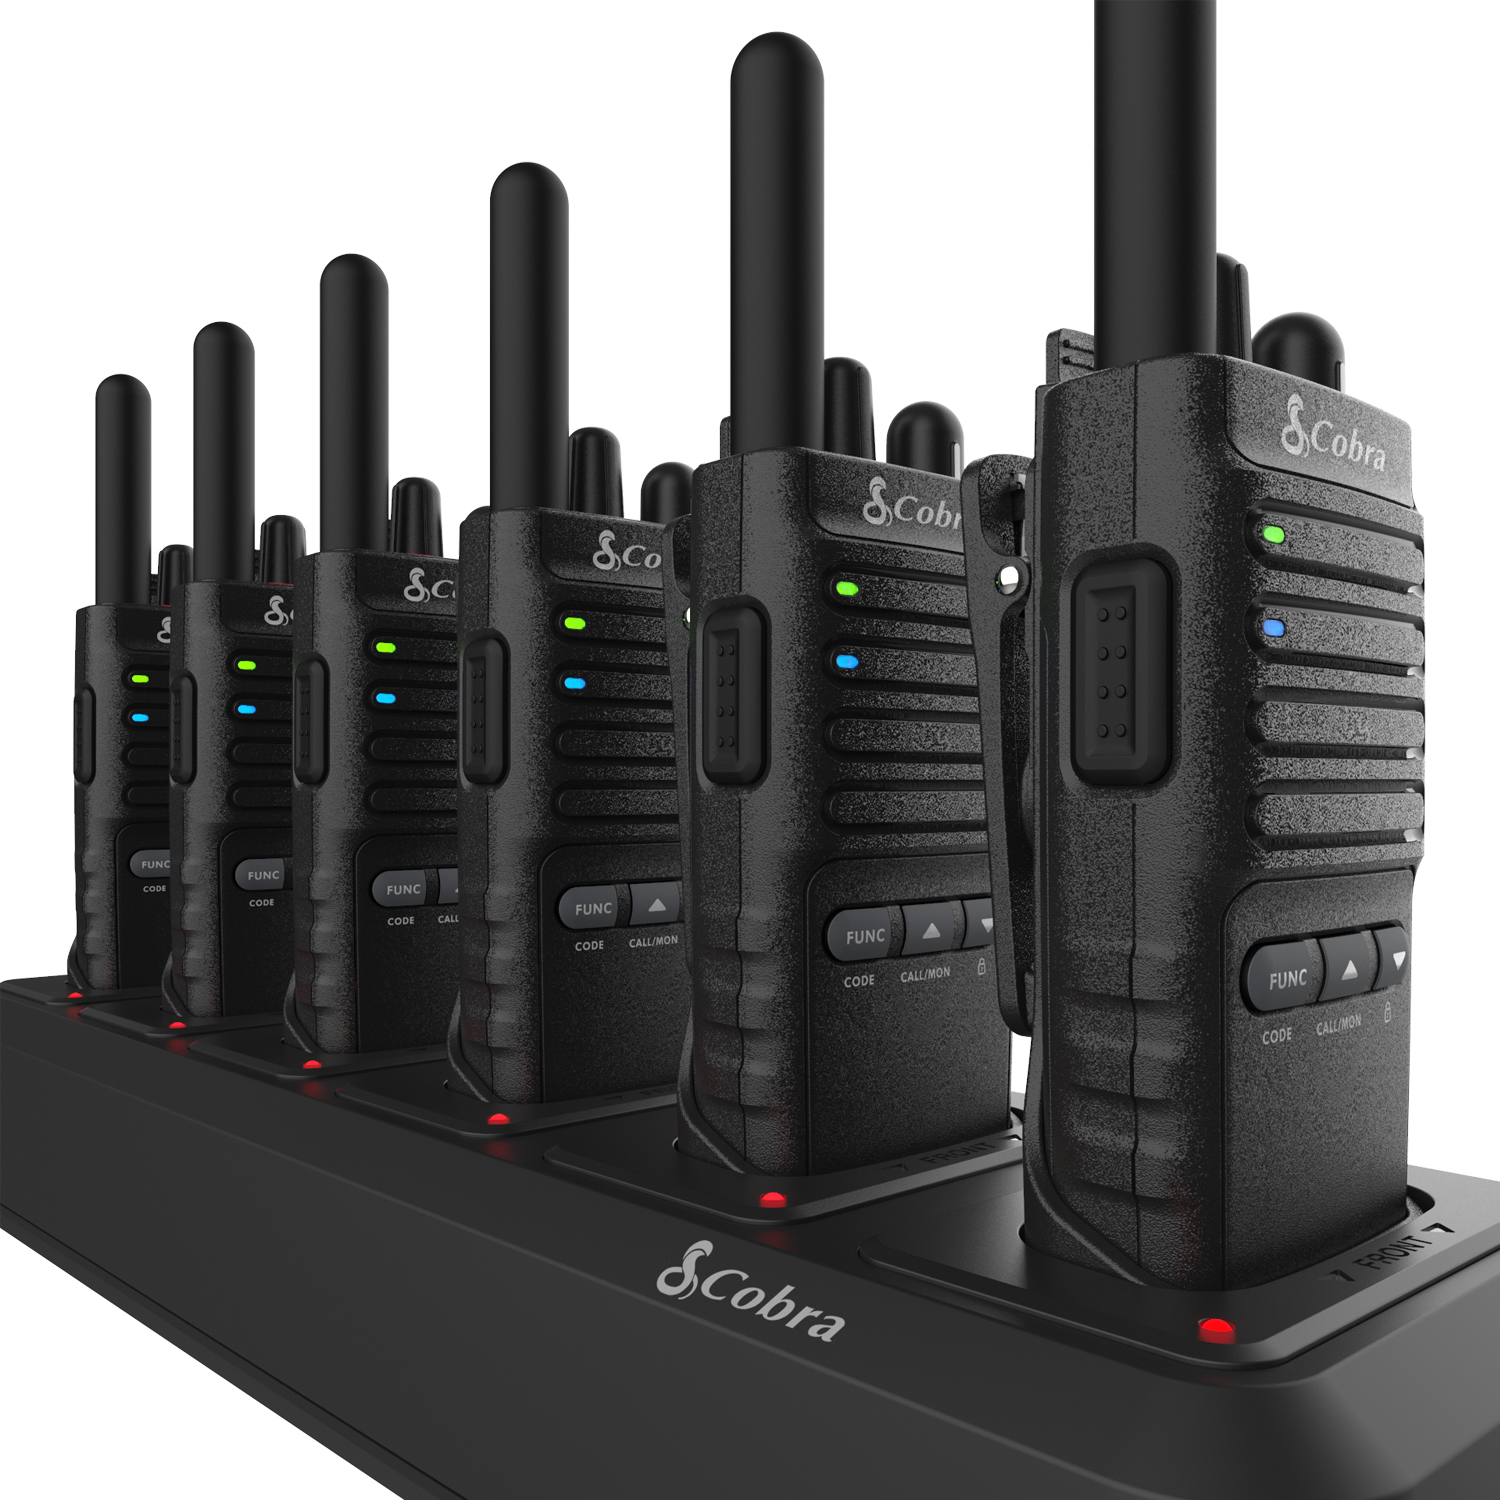 Cobra PX655 Pro Business 2W FRS Two-Way Radios (6-Pack)  Charging Dock, Business  Walkie Talkies up to 300,000 Sq ft.  25 Floors, 22 Channels, Unlimited  Expandability